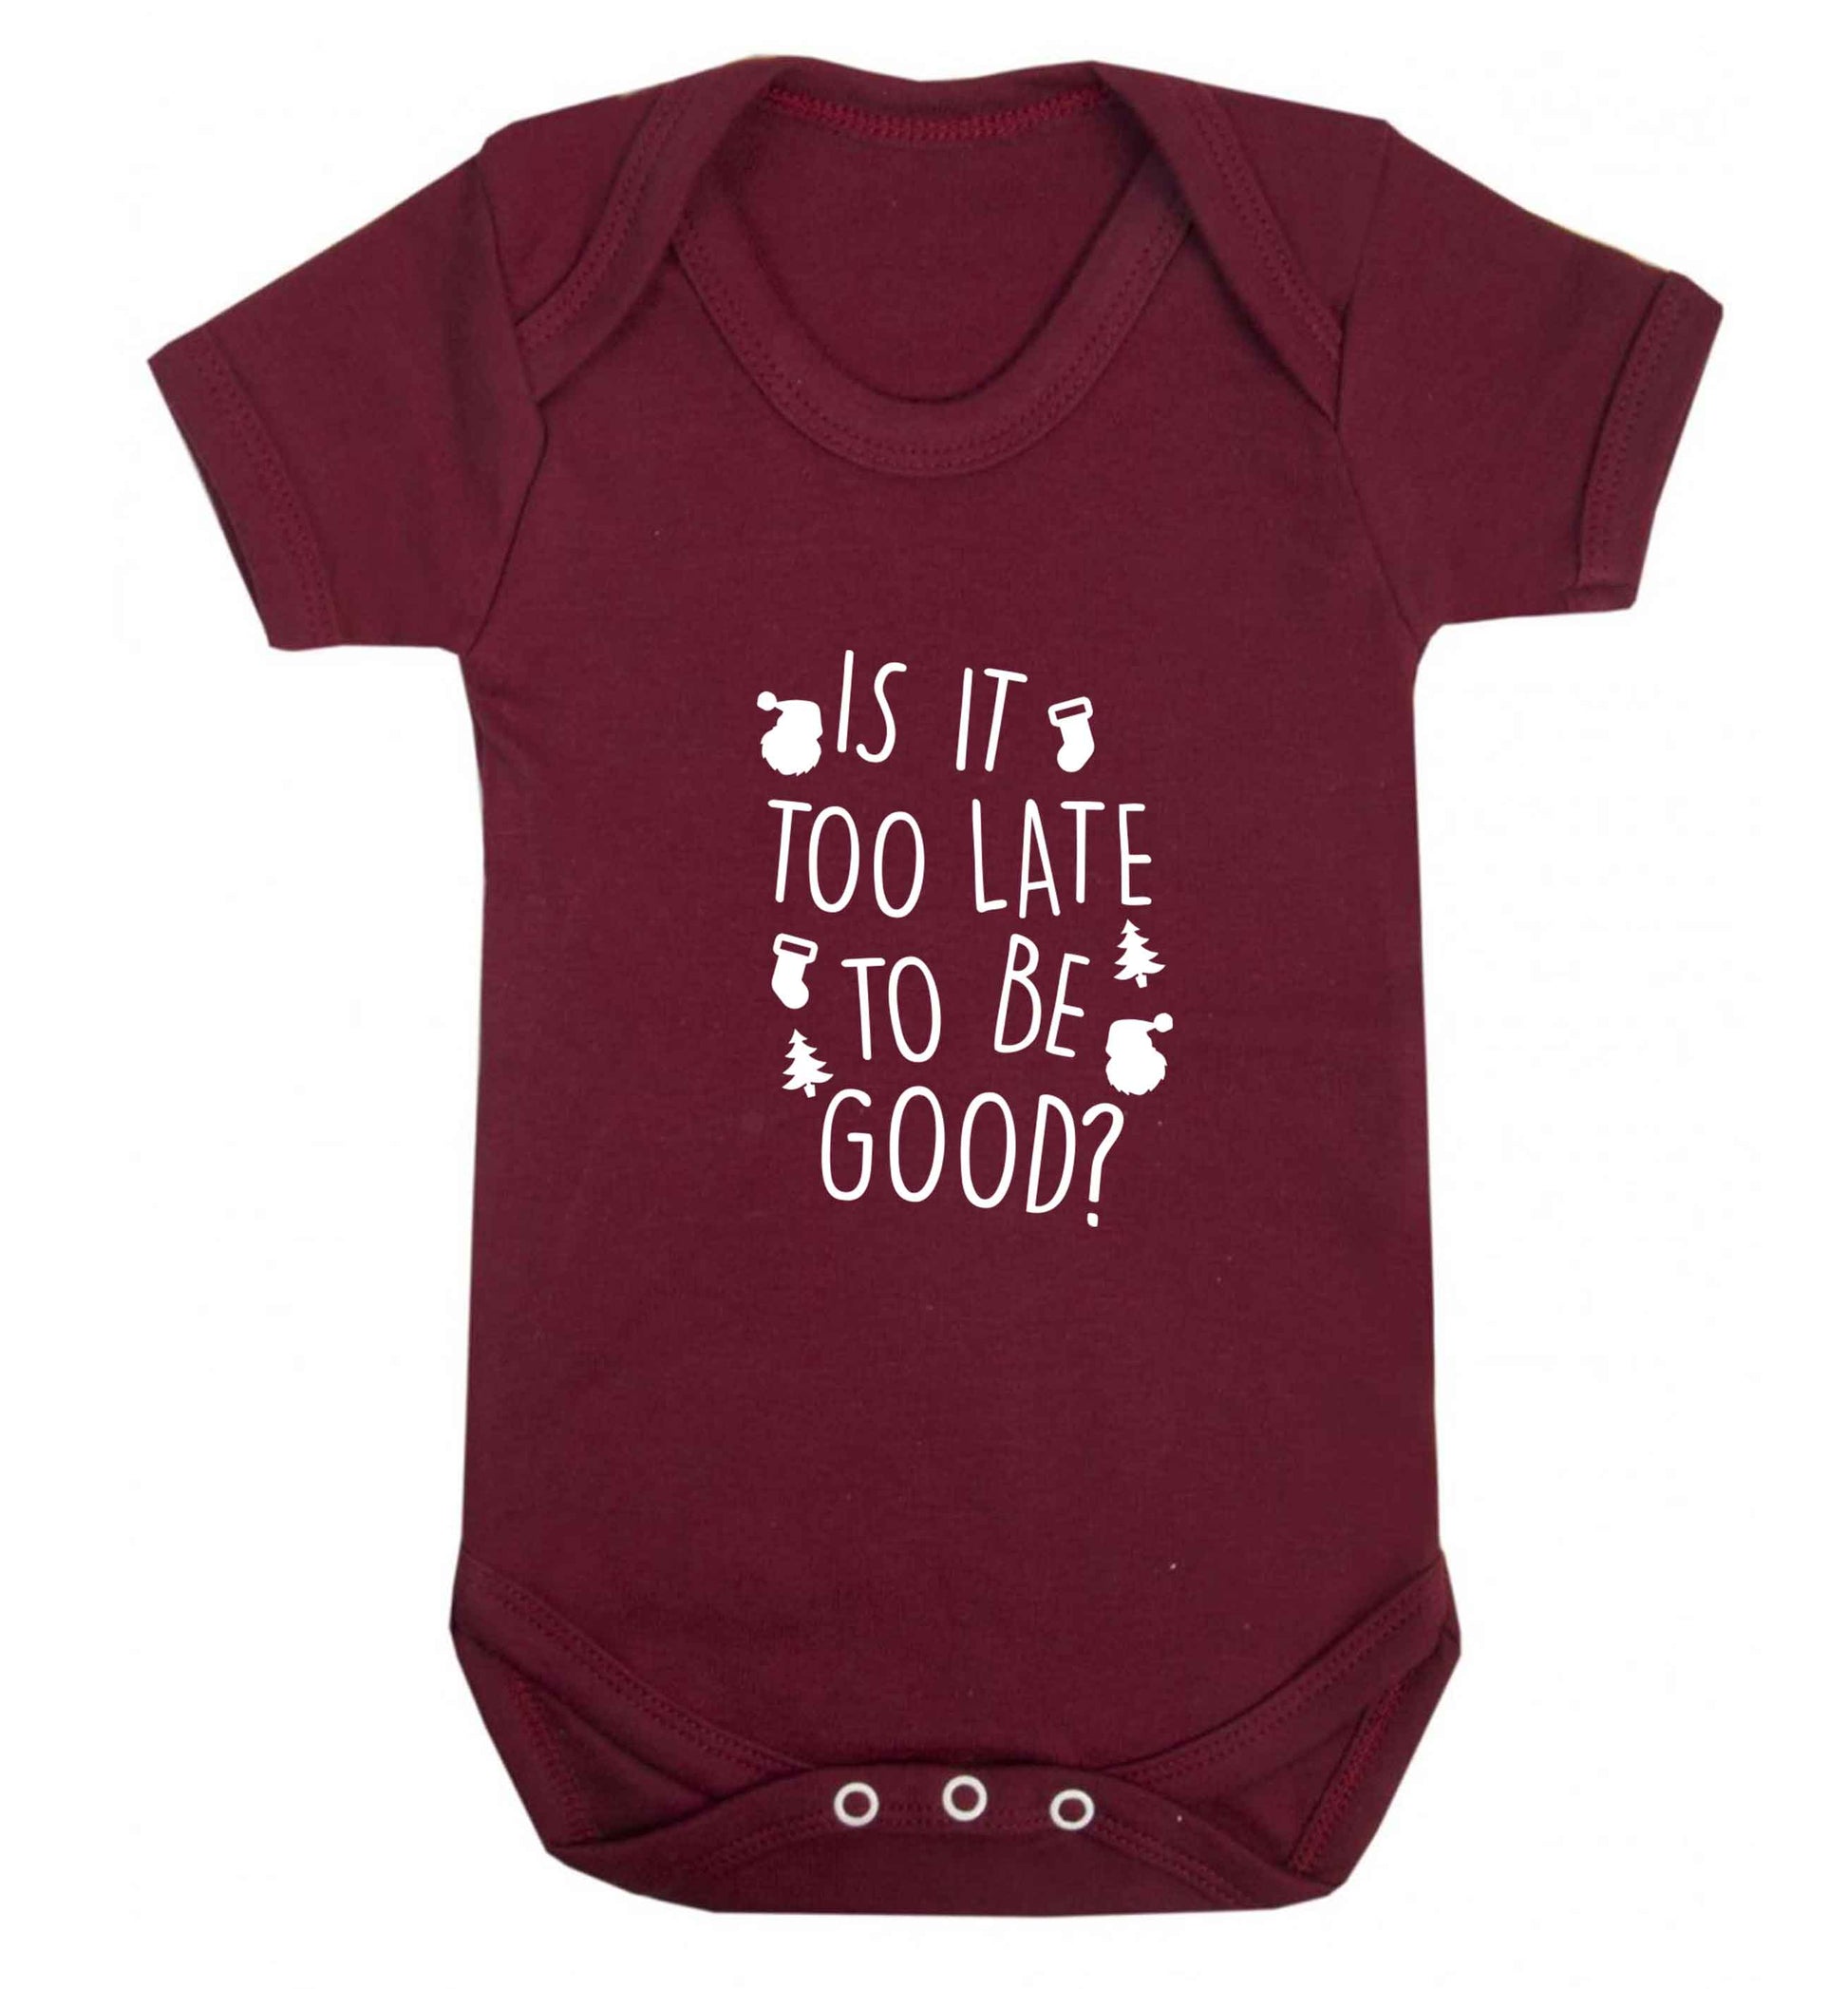 Too Late to be Good baby vest maroon 18-24 months